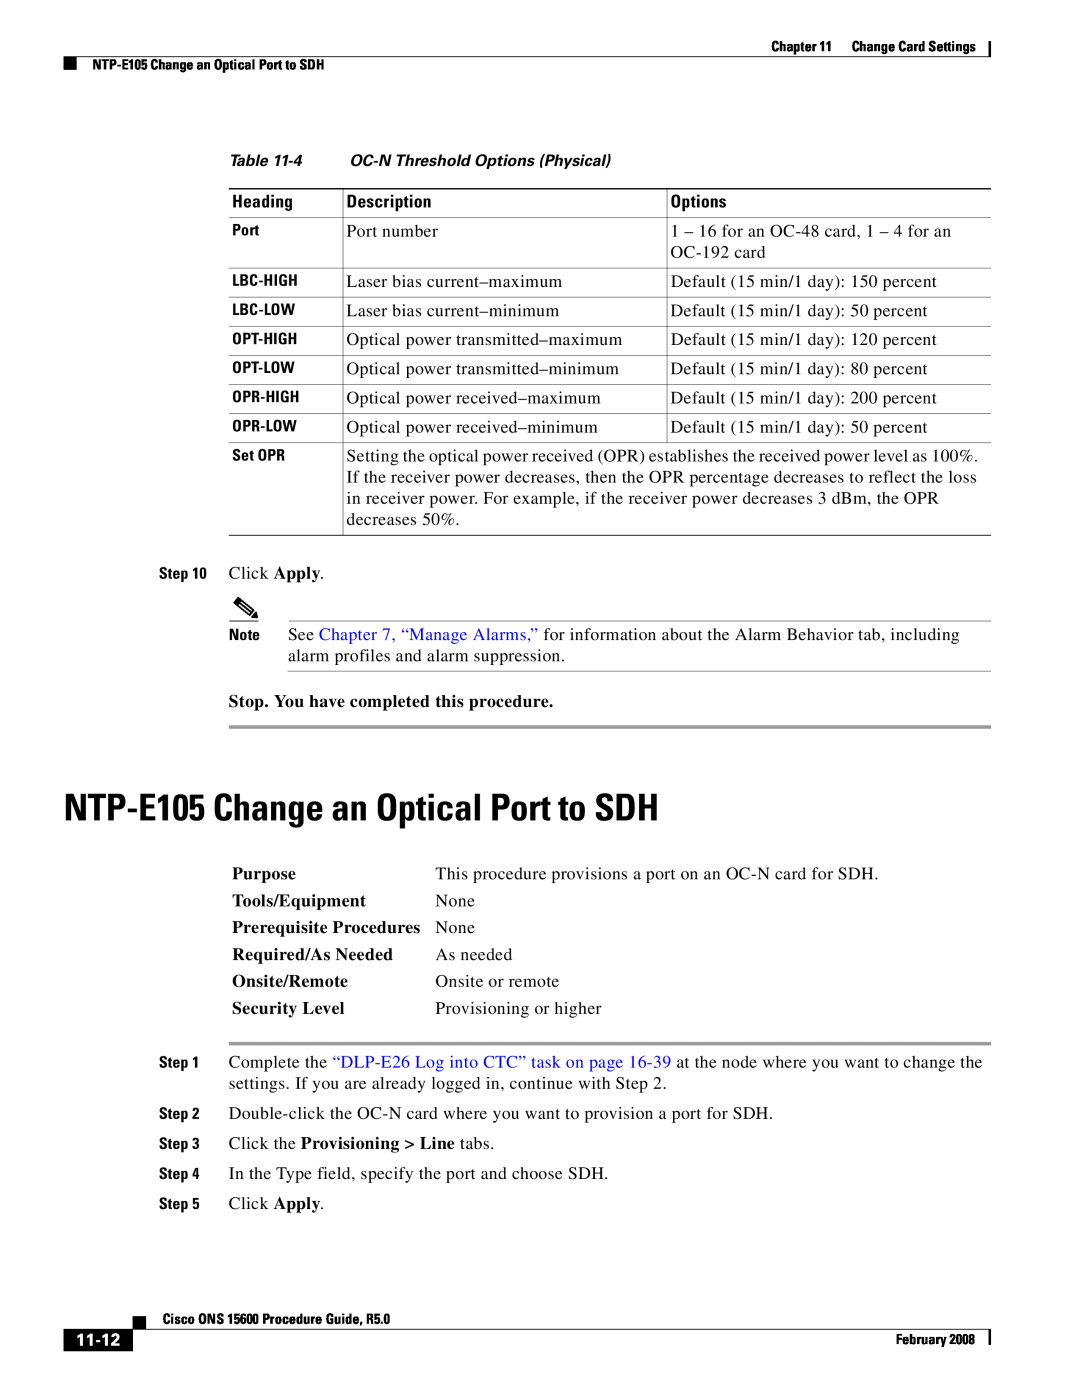 Cisco Systems ONS 15600 NTP-E105 Change an Optical Port to SDH, Click the Provisioning Line tabs, 11-12, Heading, Options 